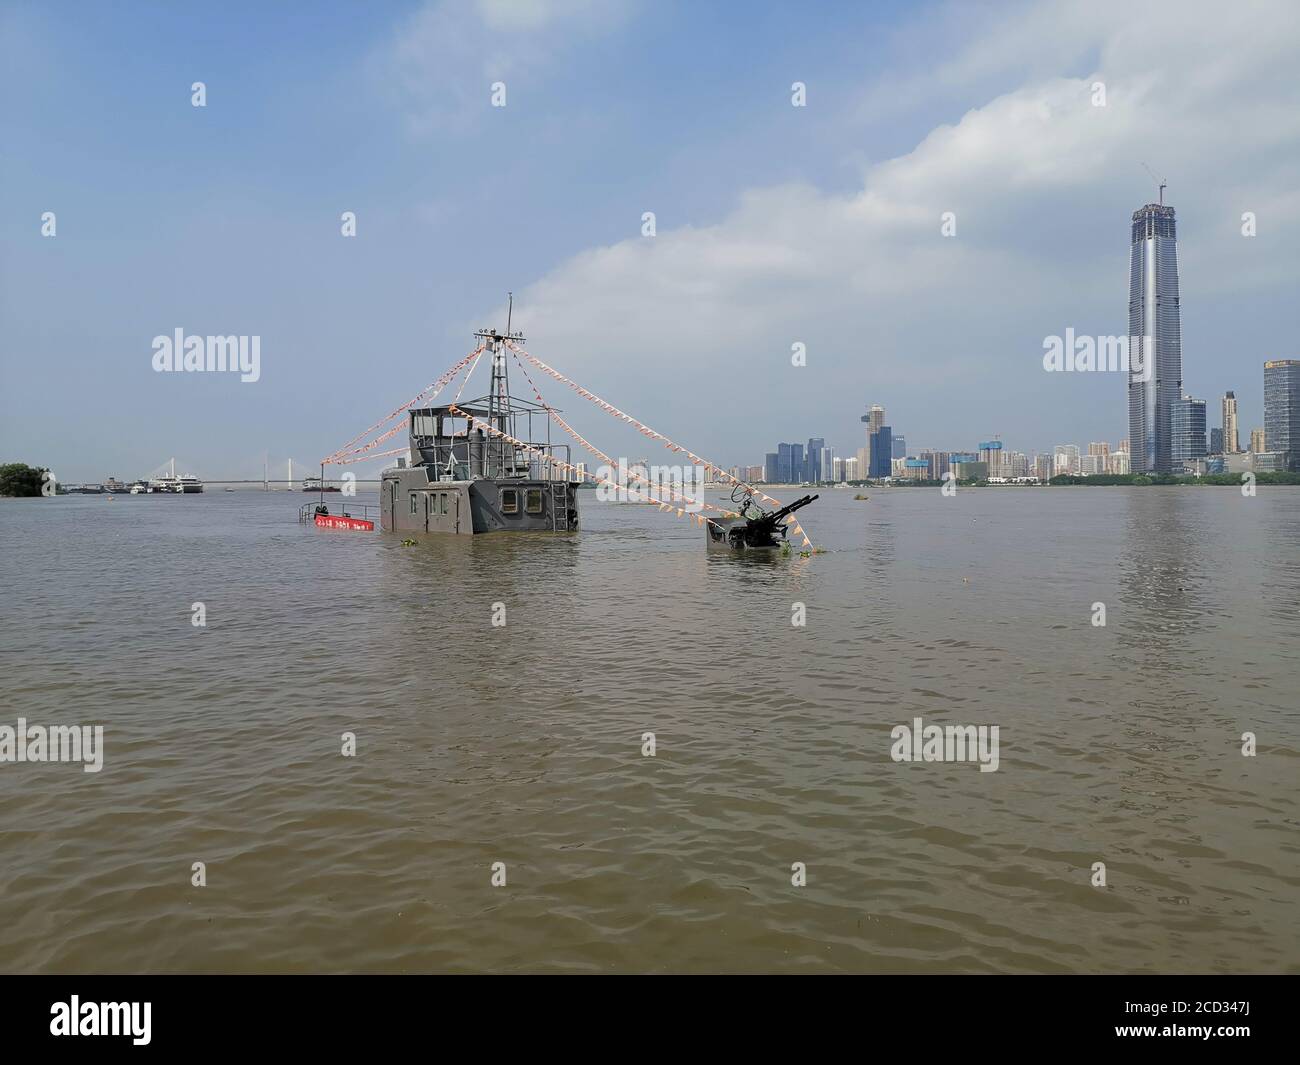 A patrol boat is flooded by rising water level caused by rainstorm in Wuhan city, south China's Hubei province, 30 June 2020. Stock Photo